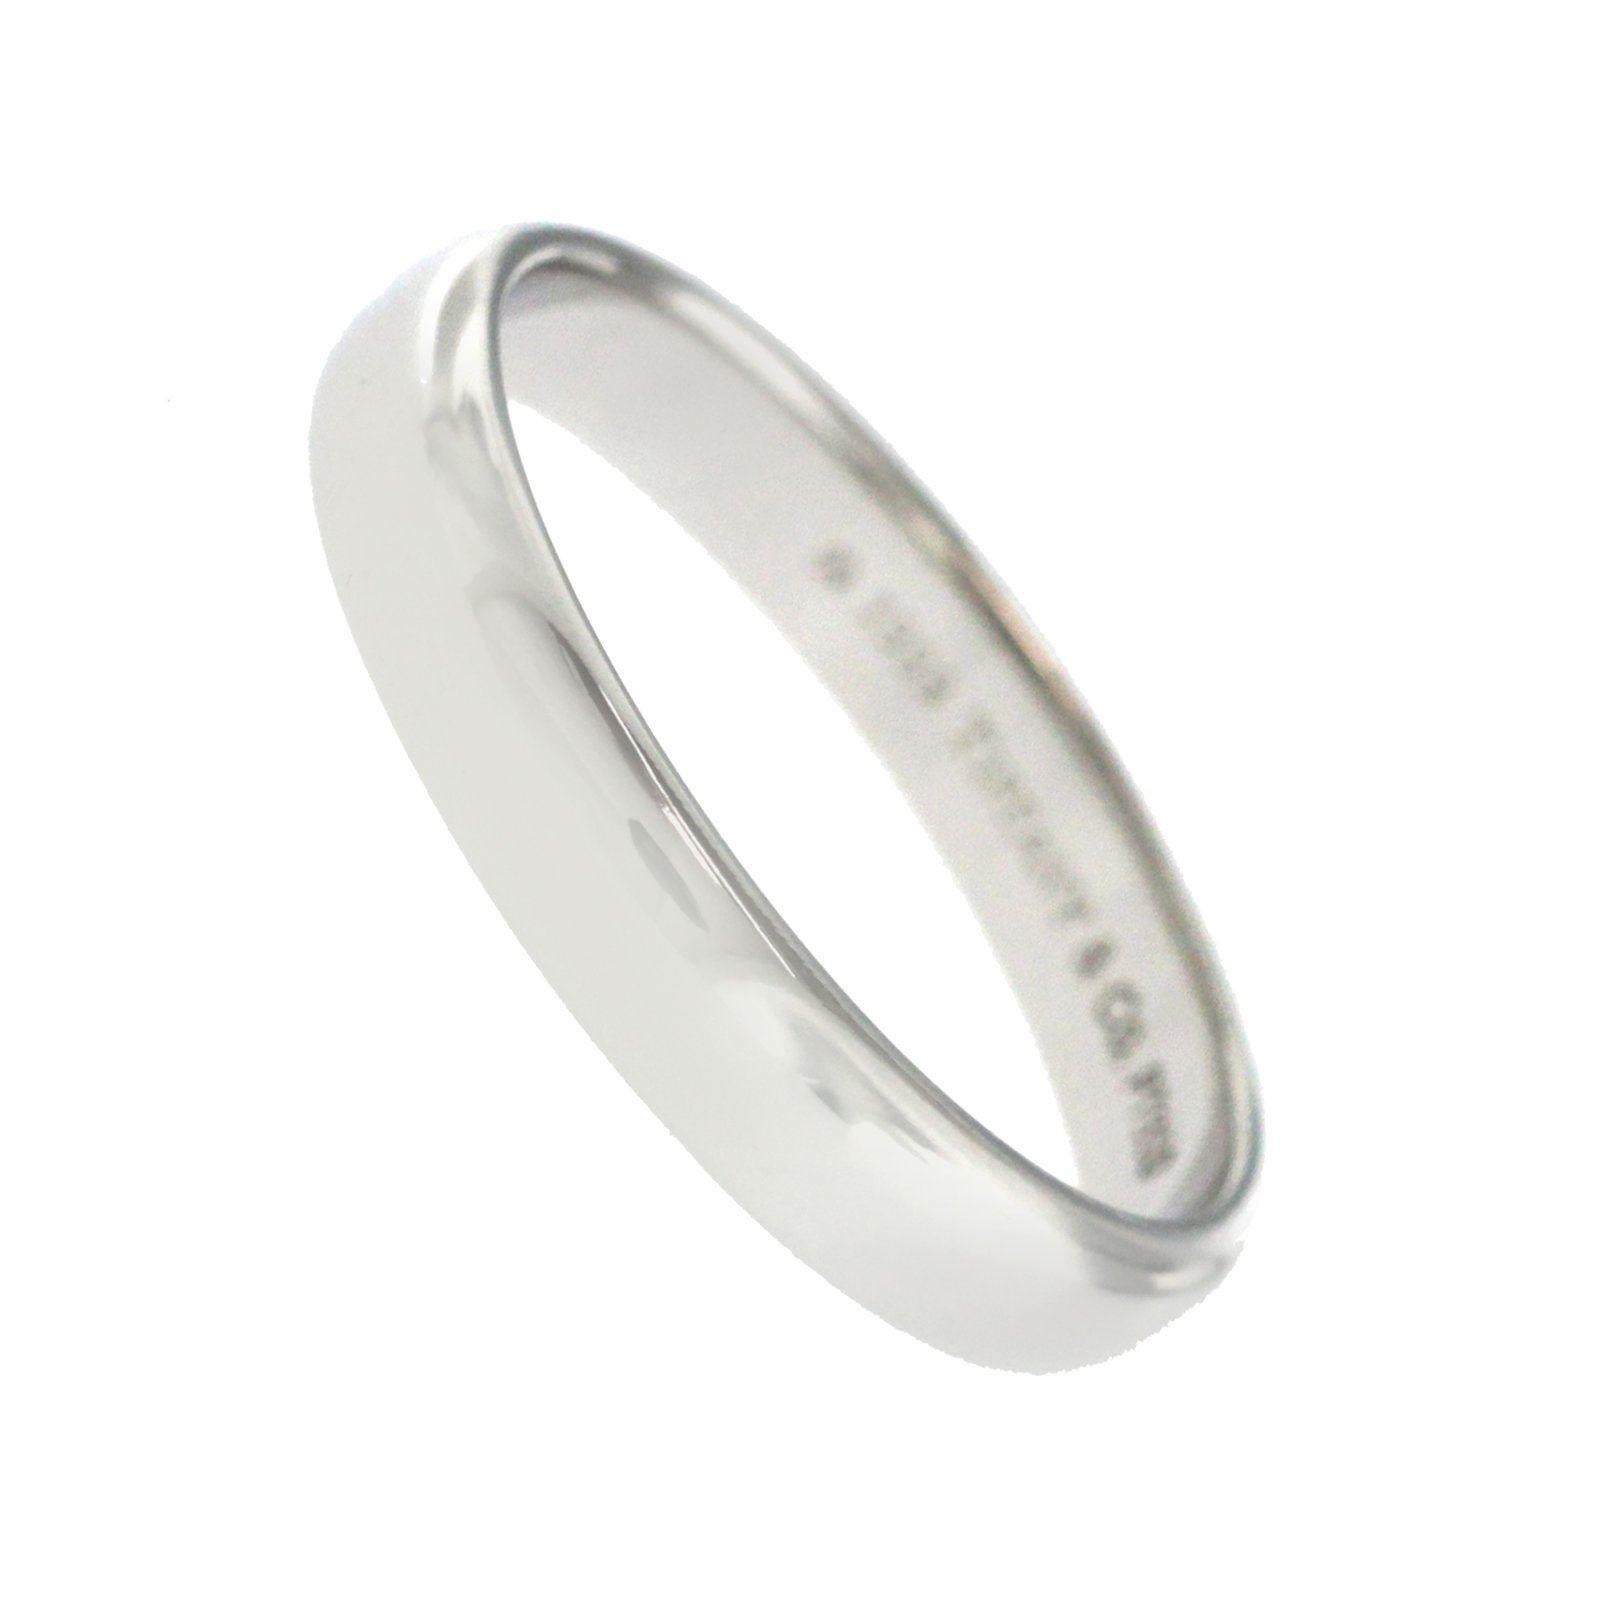 Top: 4.5 mm
Band Width: 4.5 mm
Metal: 950 Platinum
Size: 14
Hallmarks: Tiffany & Co PT950
Total Weight: 11.1 Grams
Stone Type: None
Condition: Pre Owned
Estimated Retail Price: $2400
Stock Number: U313-1